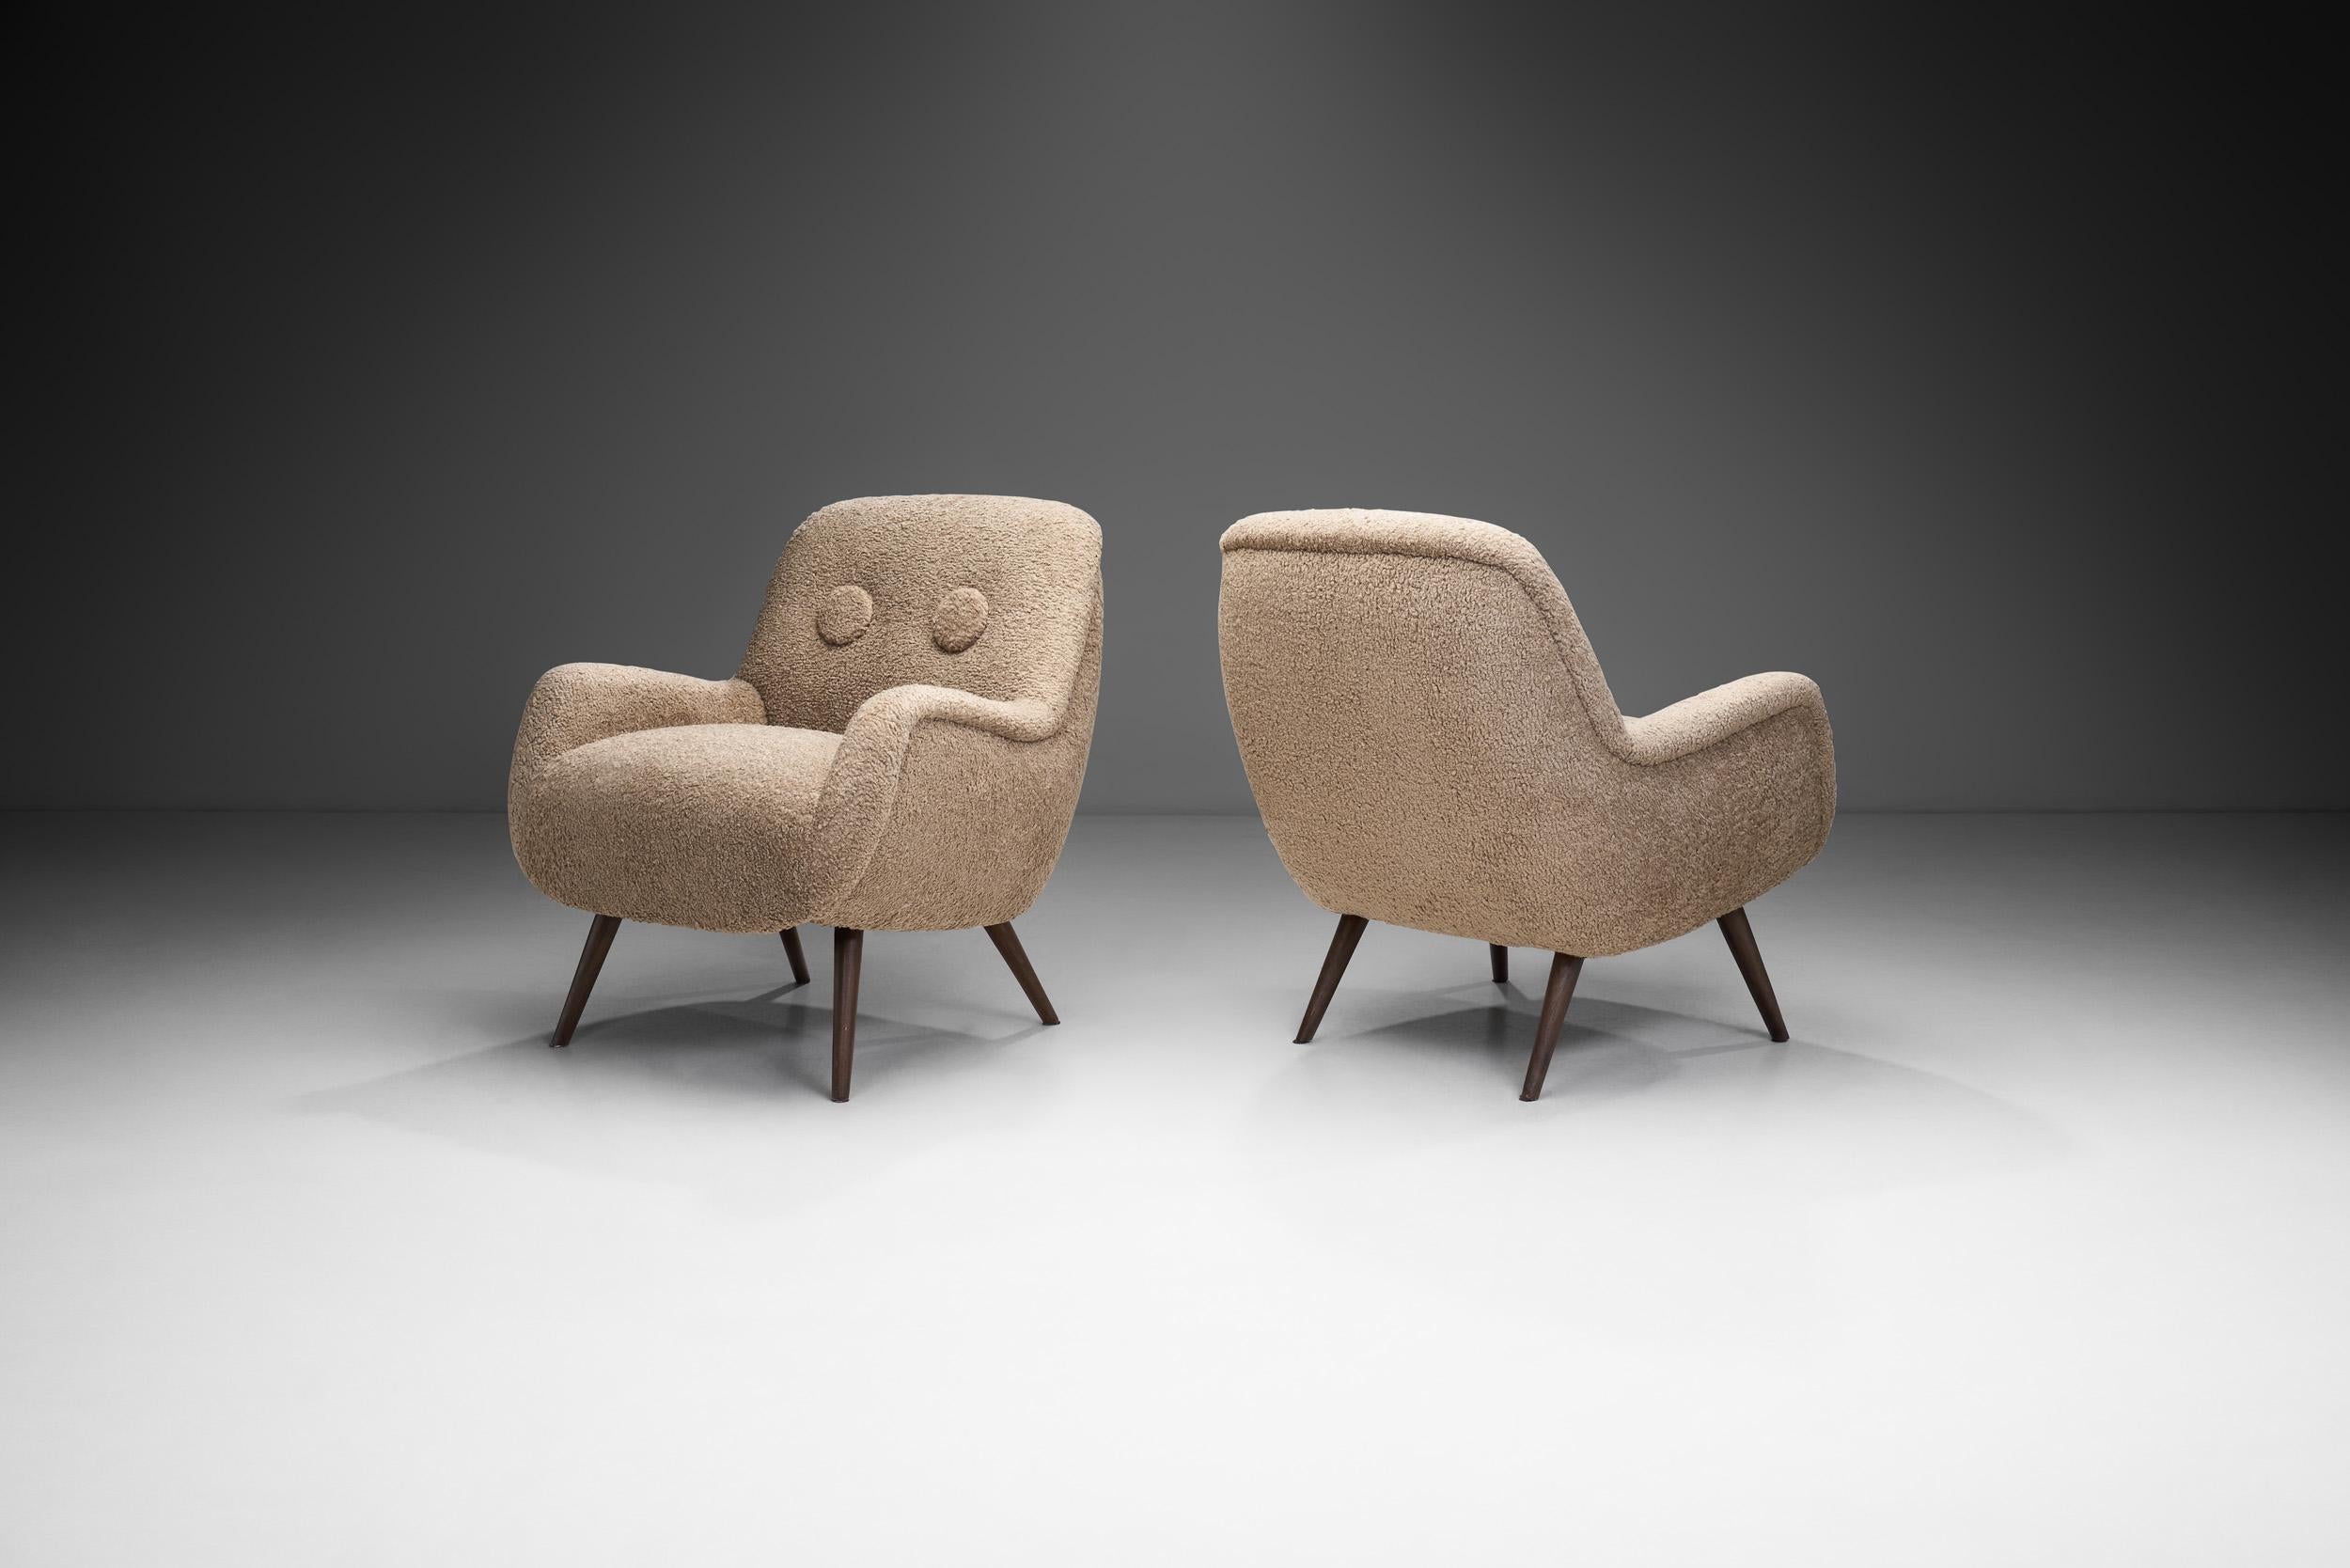 In the midst of the swinging 1960s, a remarkable design style emerged, a kind of mature mid-century modernism that captivated the essence of the era's design trends. These lounge chairs, mixing classic materials and shapes, remain exemplary